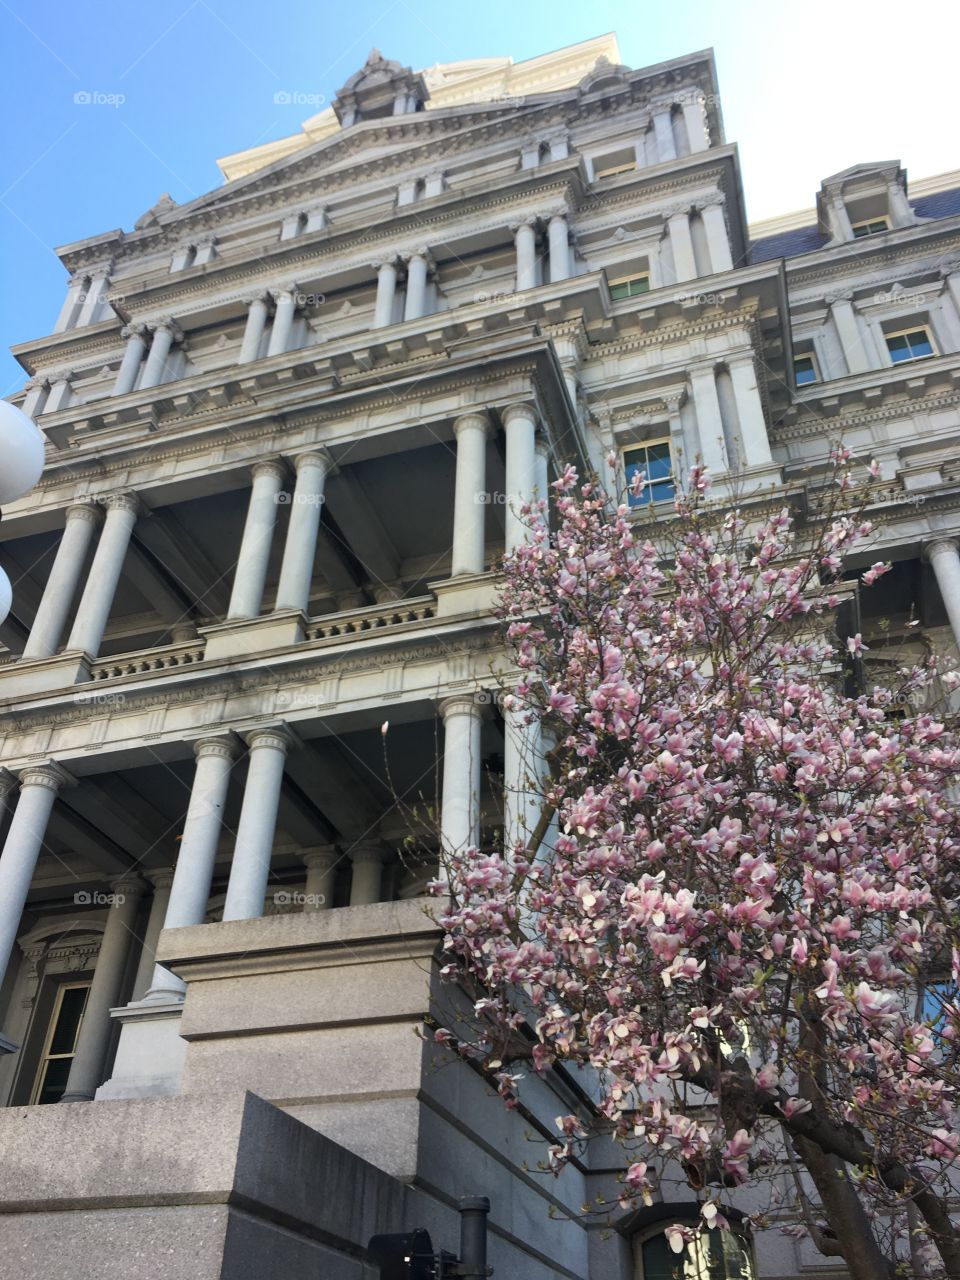 Washington DC Cherry Blossoms. Cherry blossoms blooming outside the Eisenhower Executive Office Building